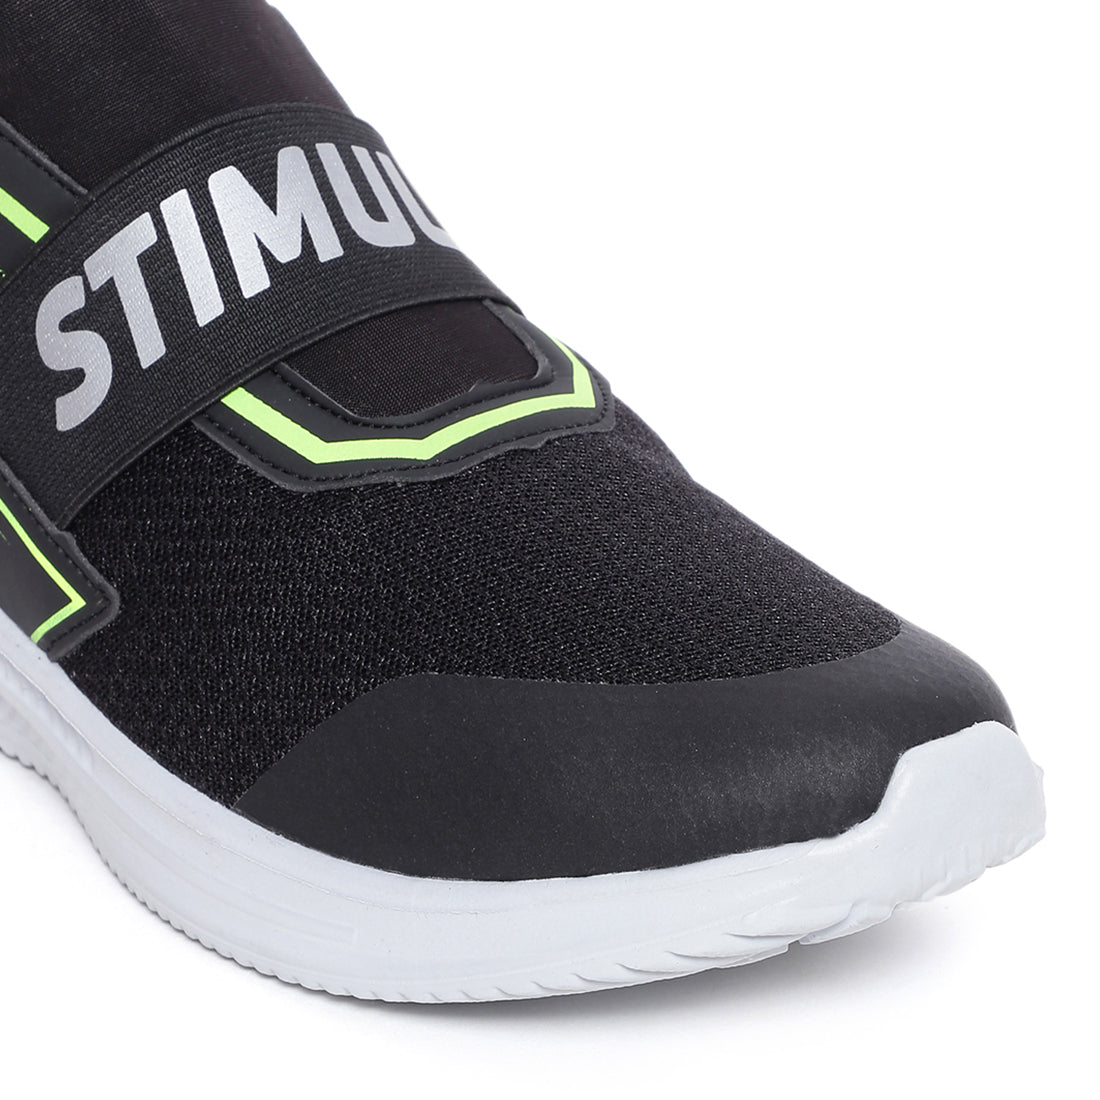 Stimulus FBSTG6012AS Black Comfortable Daily Outdoor Sports Shoes For Men